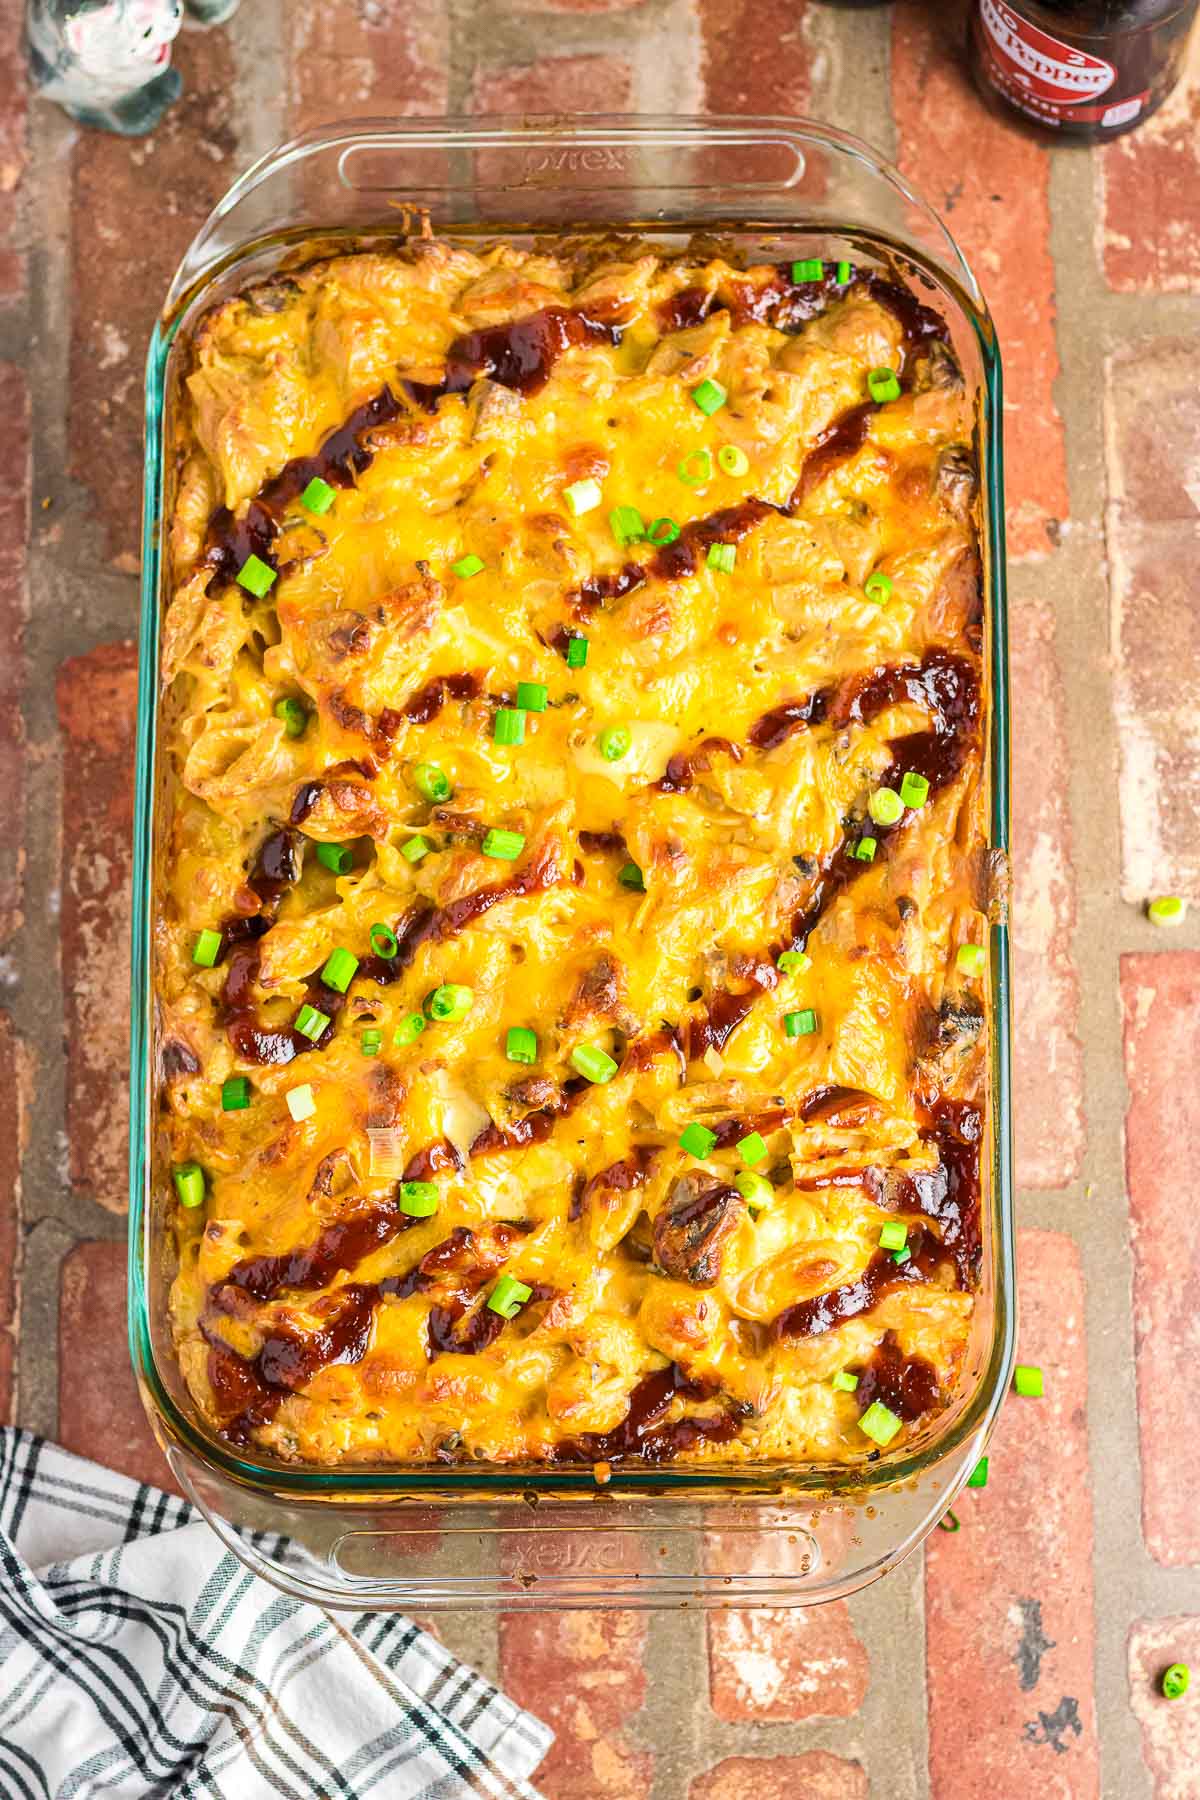 BBQ macaroni and cheese in a glass casserole dish.